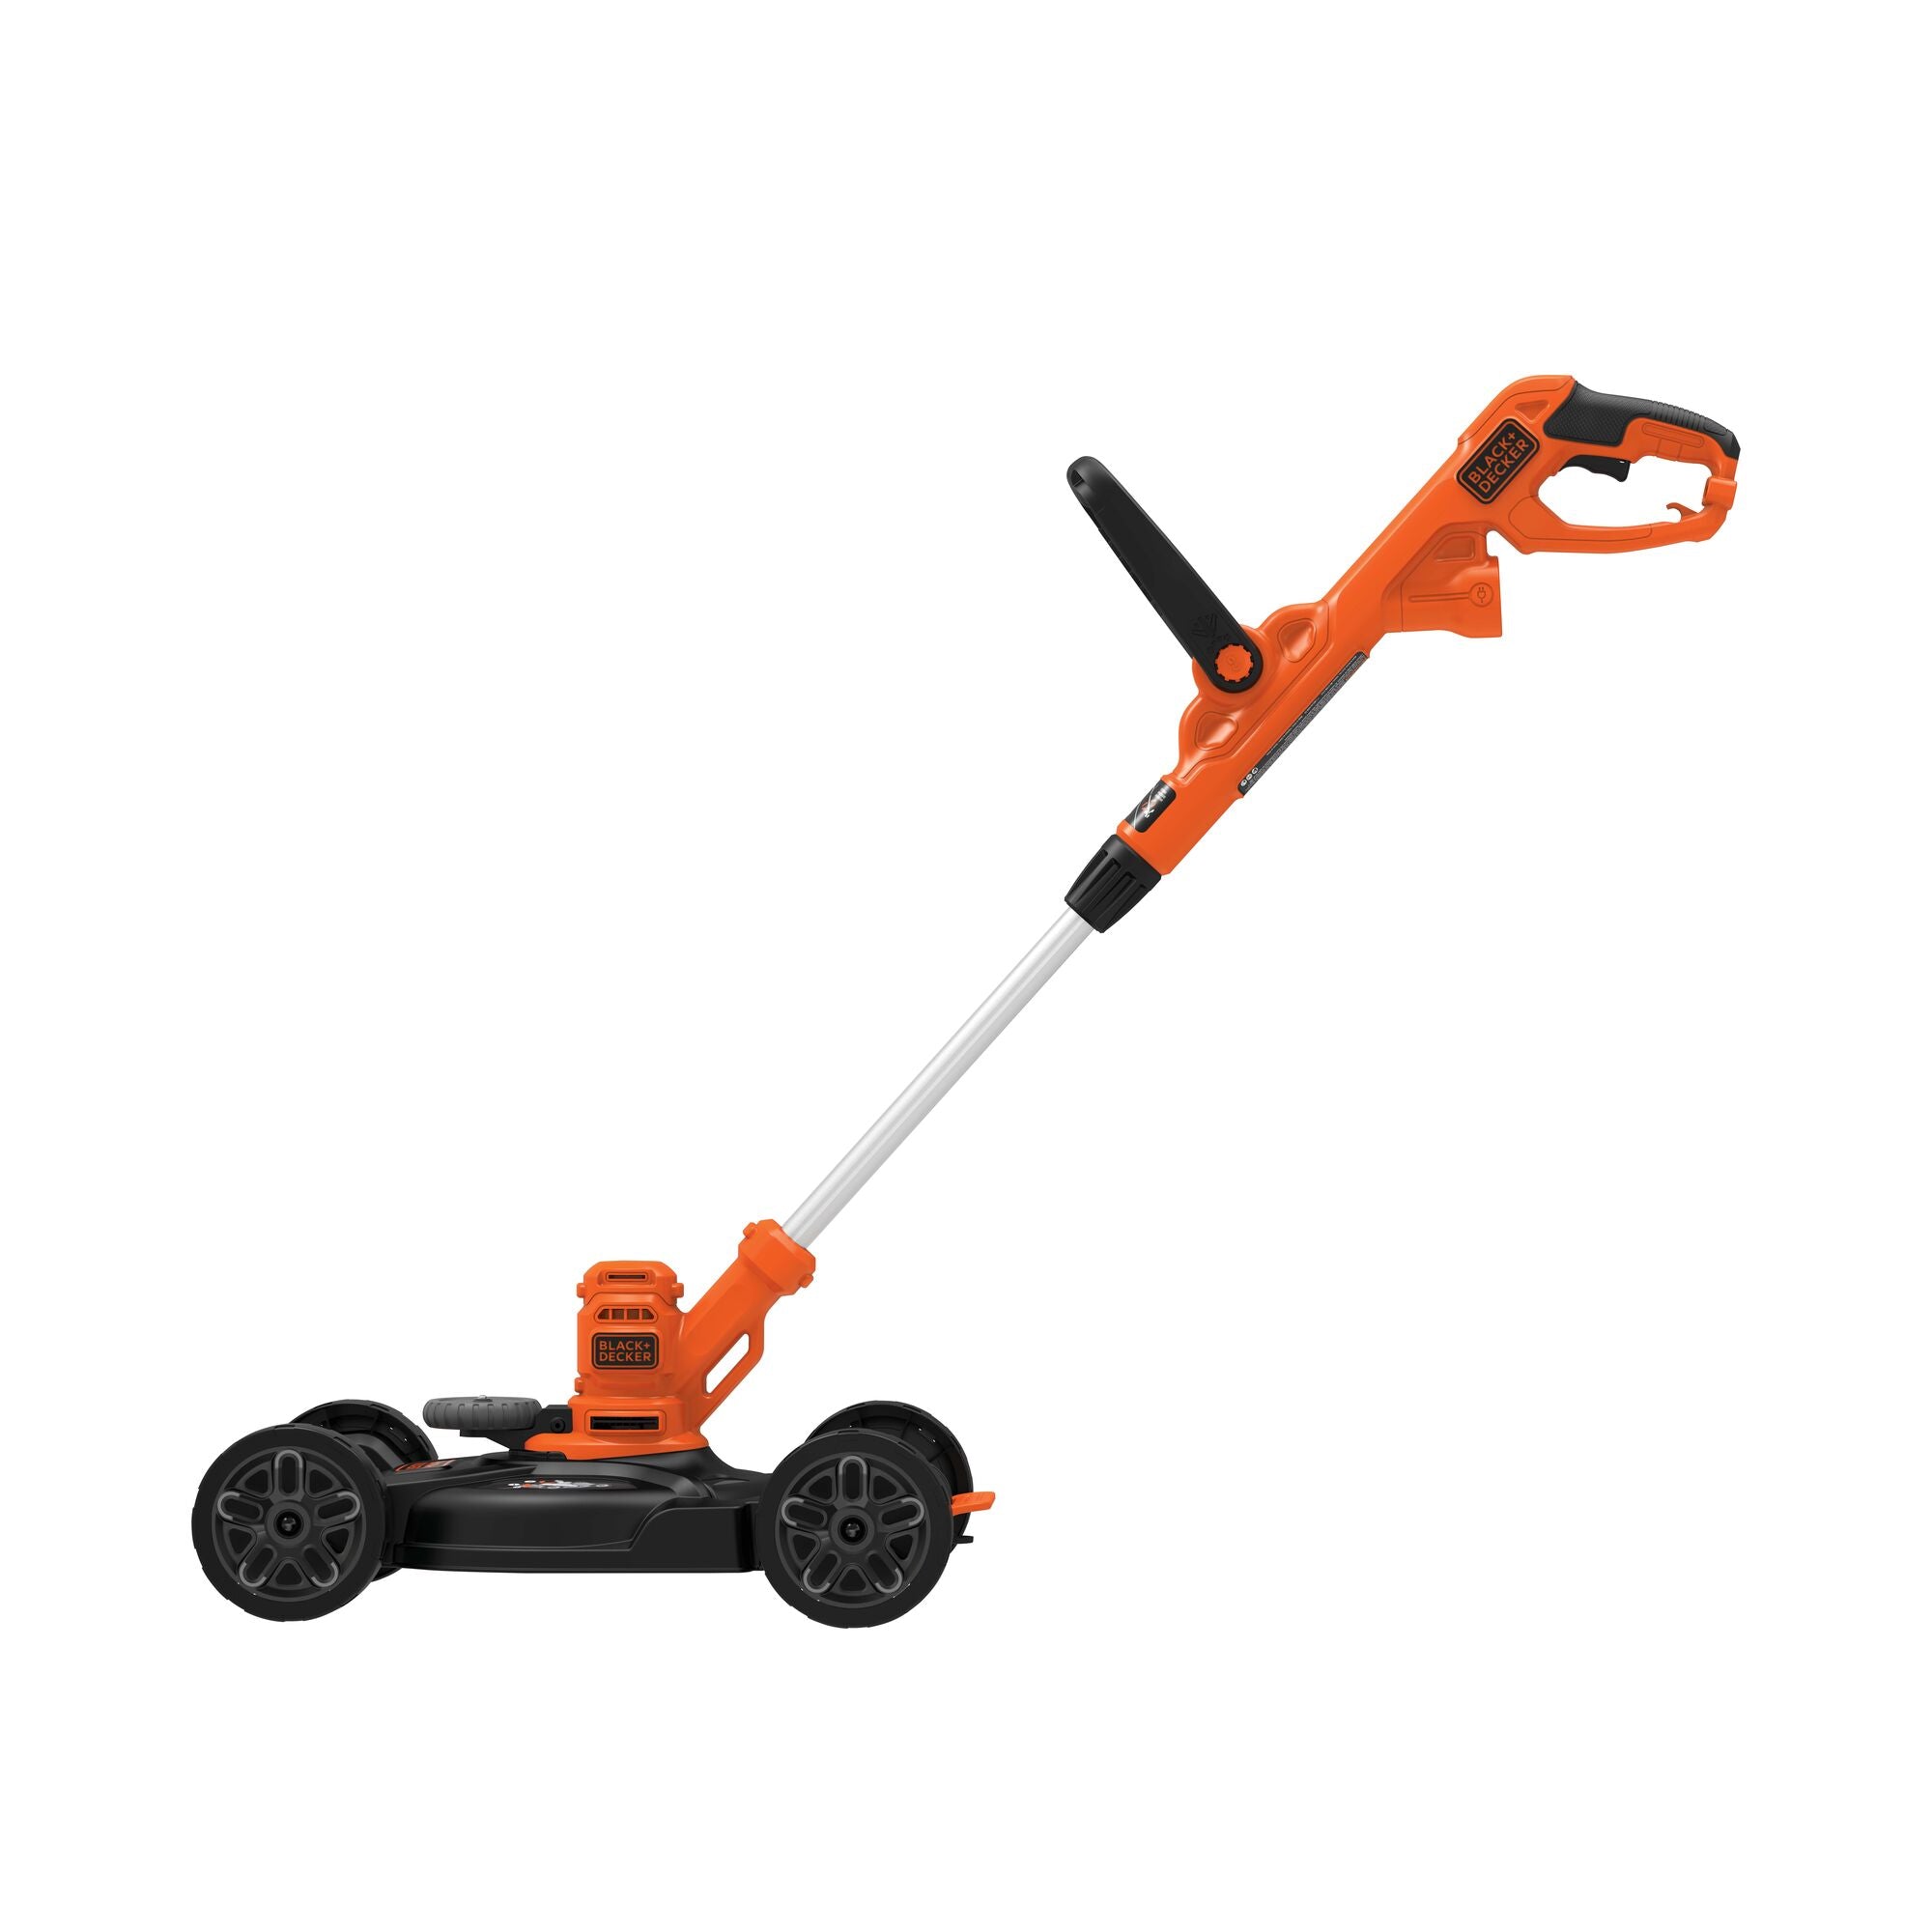 Black+decker Corded Electric 3-in-1 Leaf Blower, Vacuum, Mulcher and 2-in-1 String Trimmer & Grass Edger Combo Kit